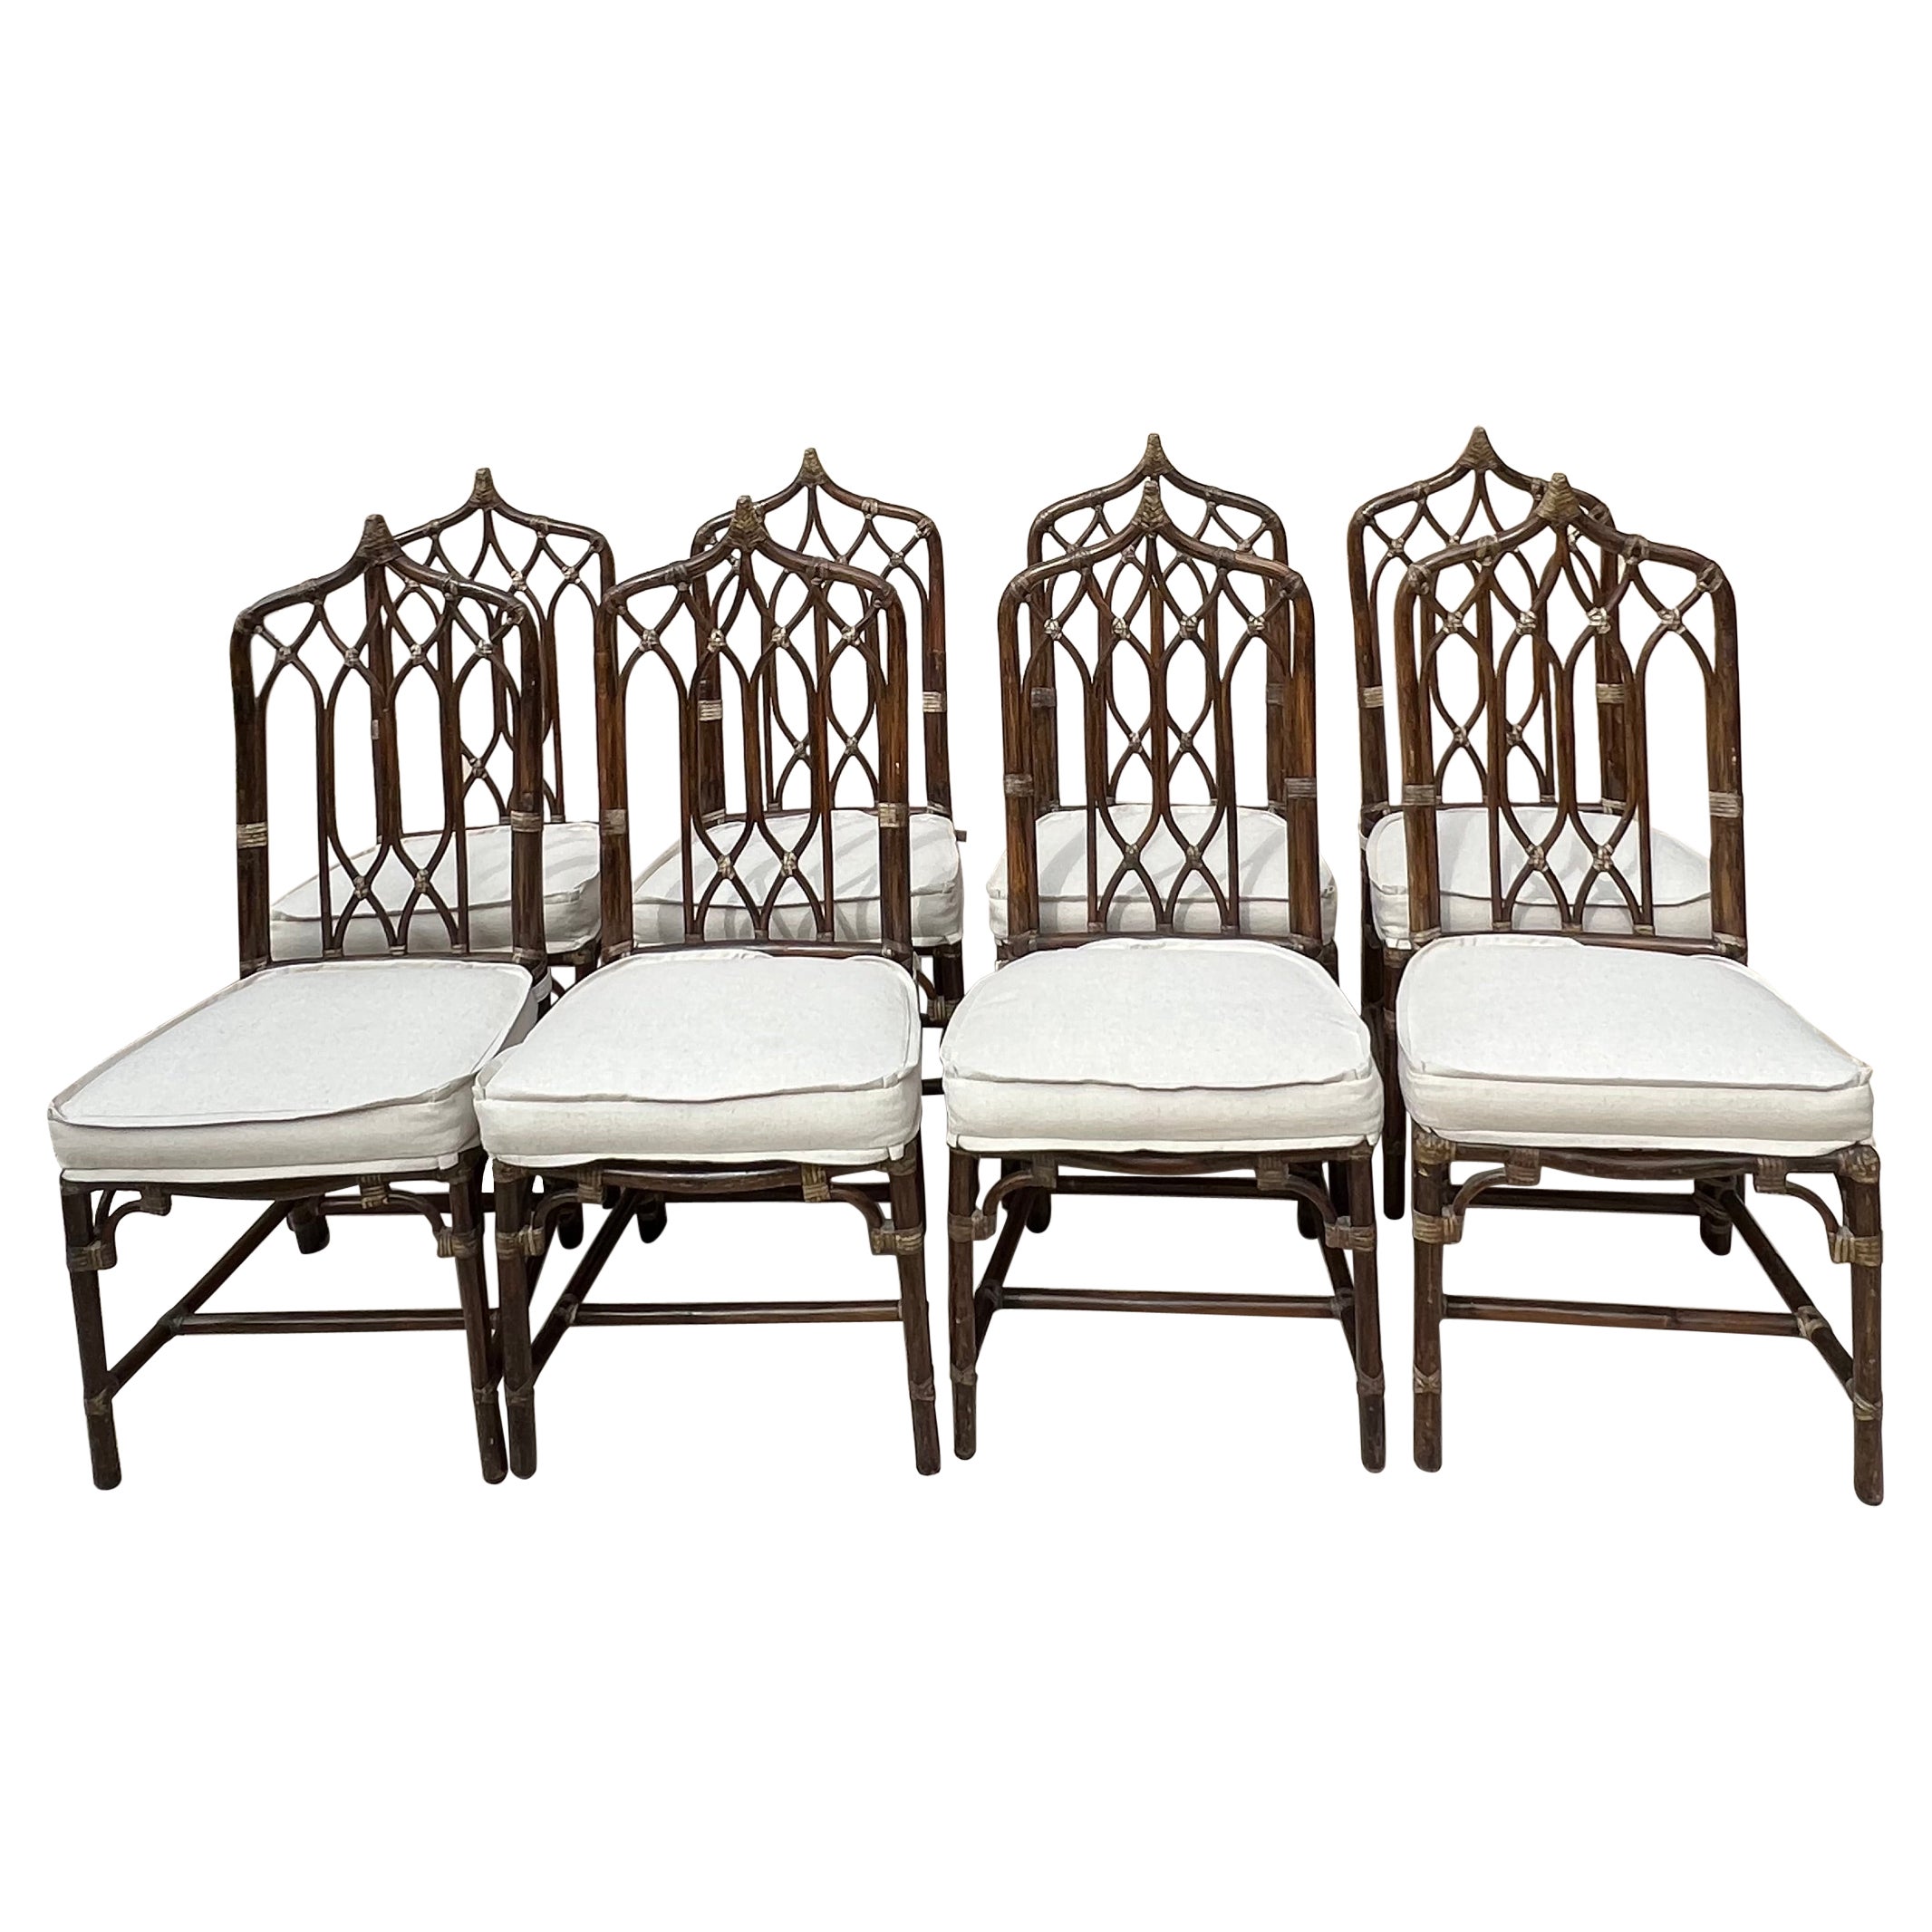 Set of 8 McGuire Cathedral Chairs Chairs